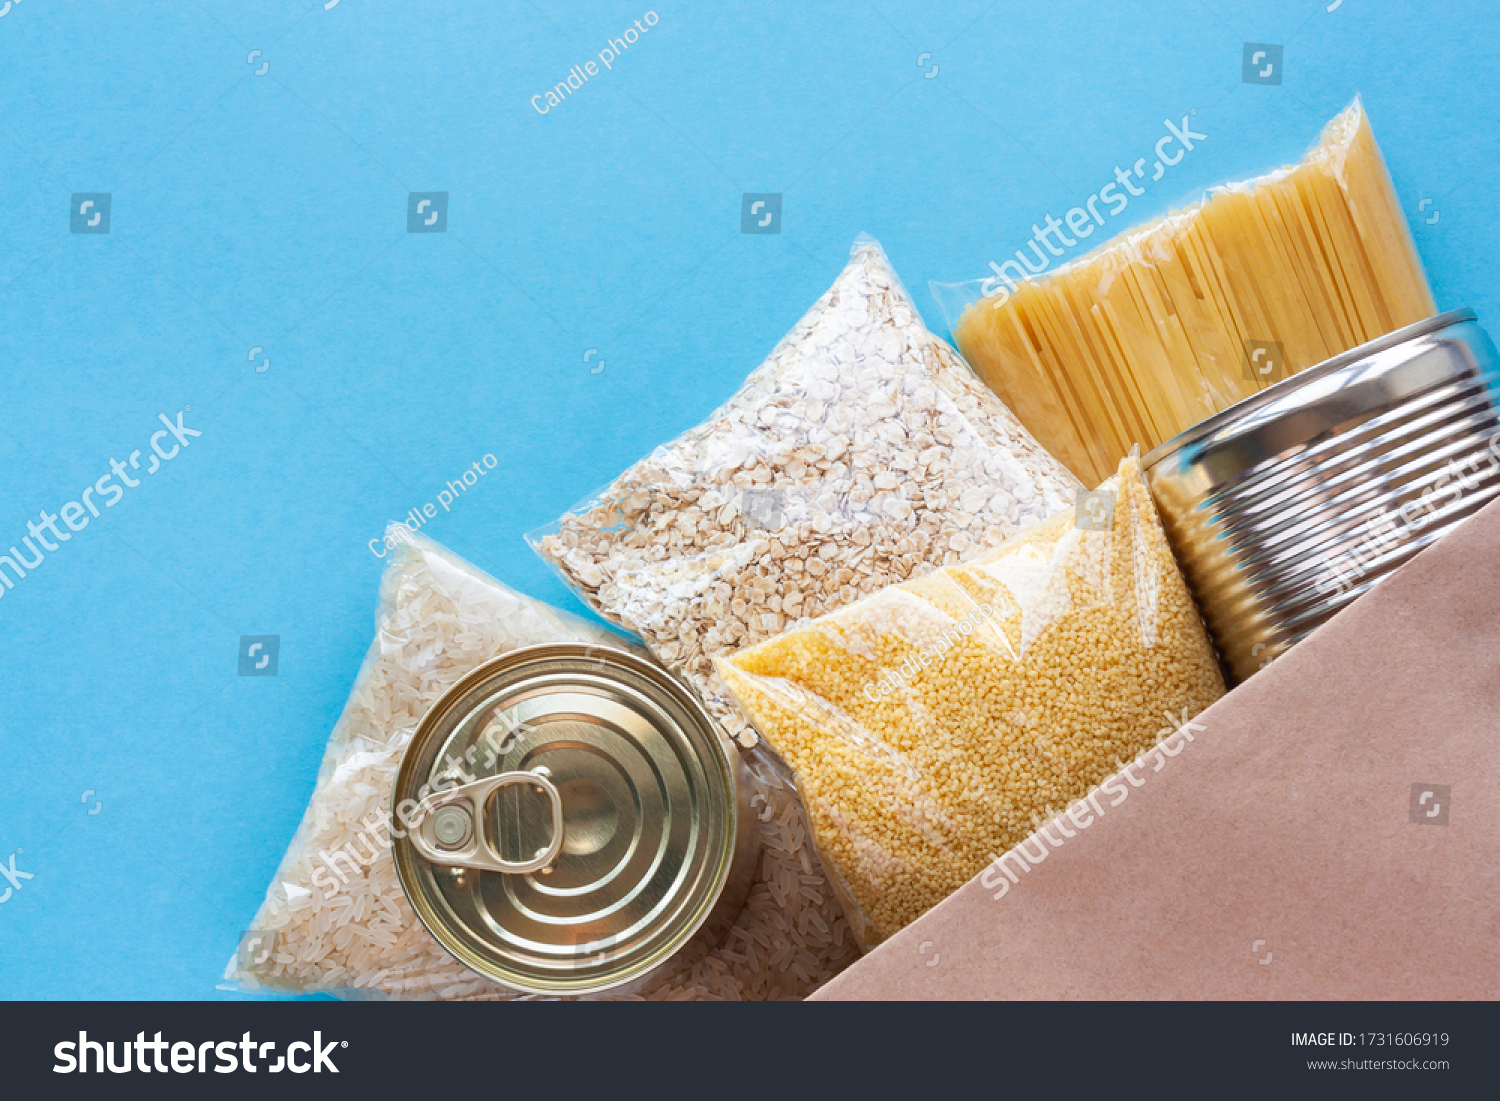 Various grocery products in packages top view. Pasta, cereals and canned food in paper bag on blue background. Food delivery, donation or stock provision concept. Copy space. #1731606919